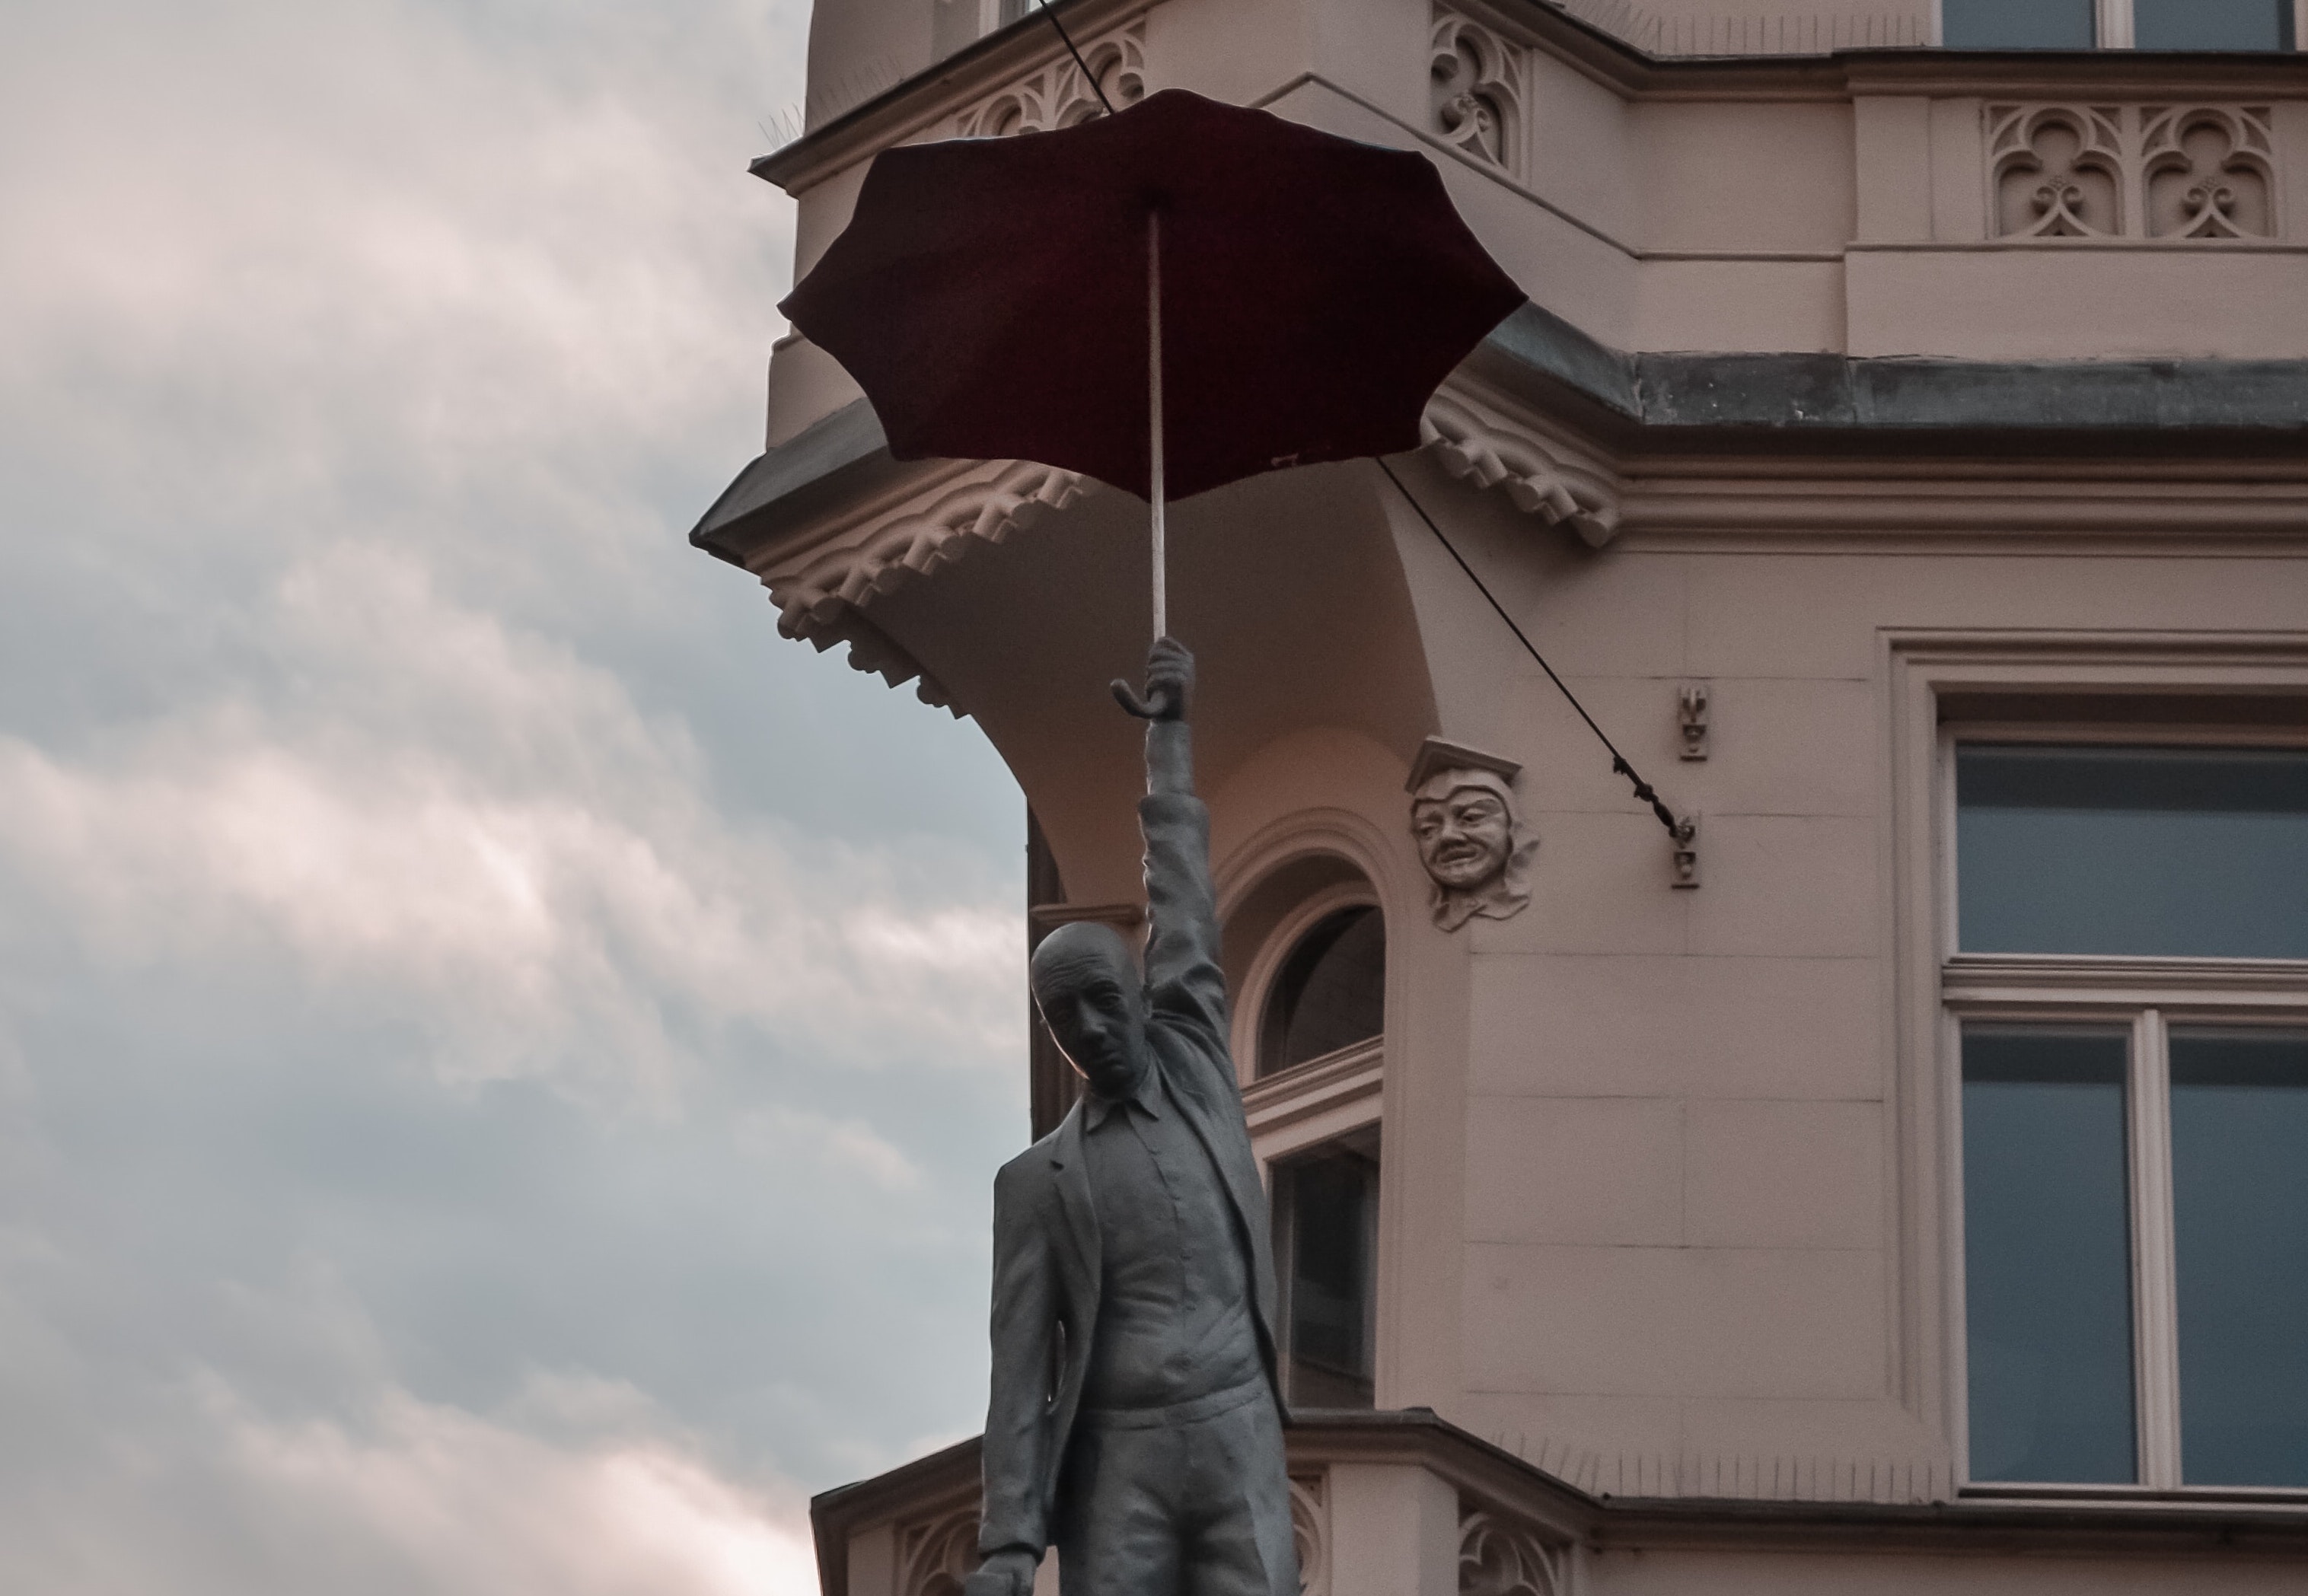 The Slight Uncertainty Statue by Michal Trpák in Prague